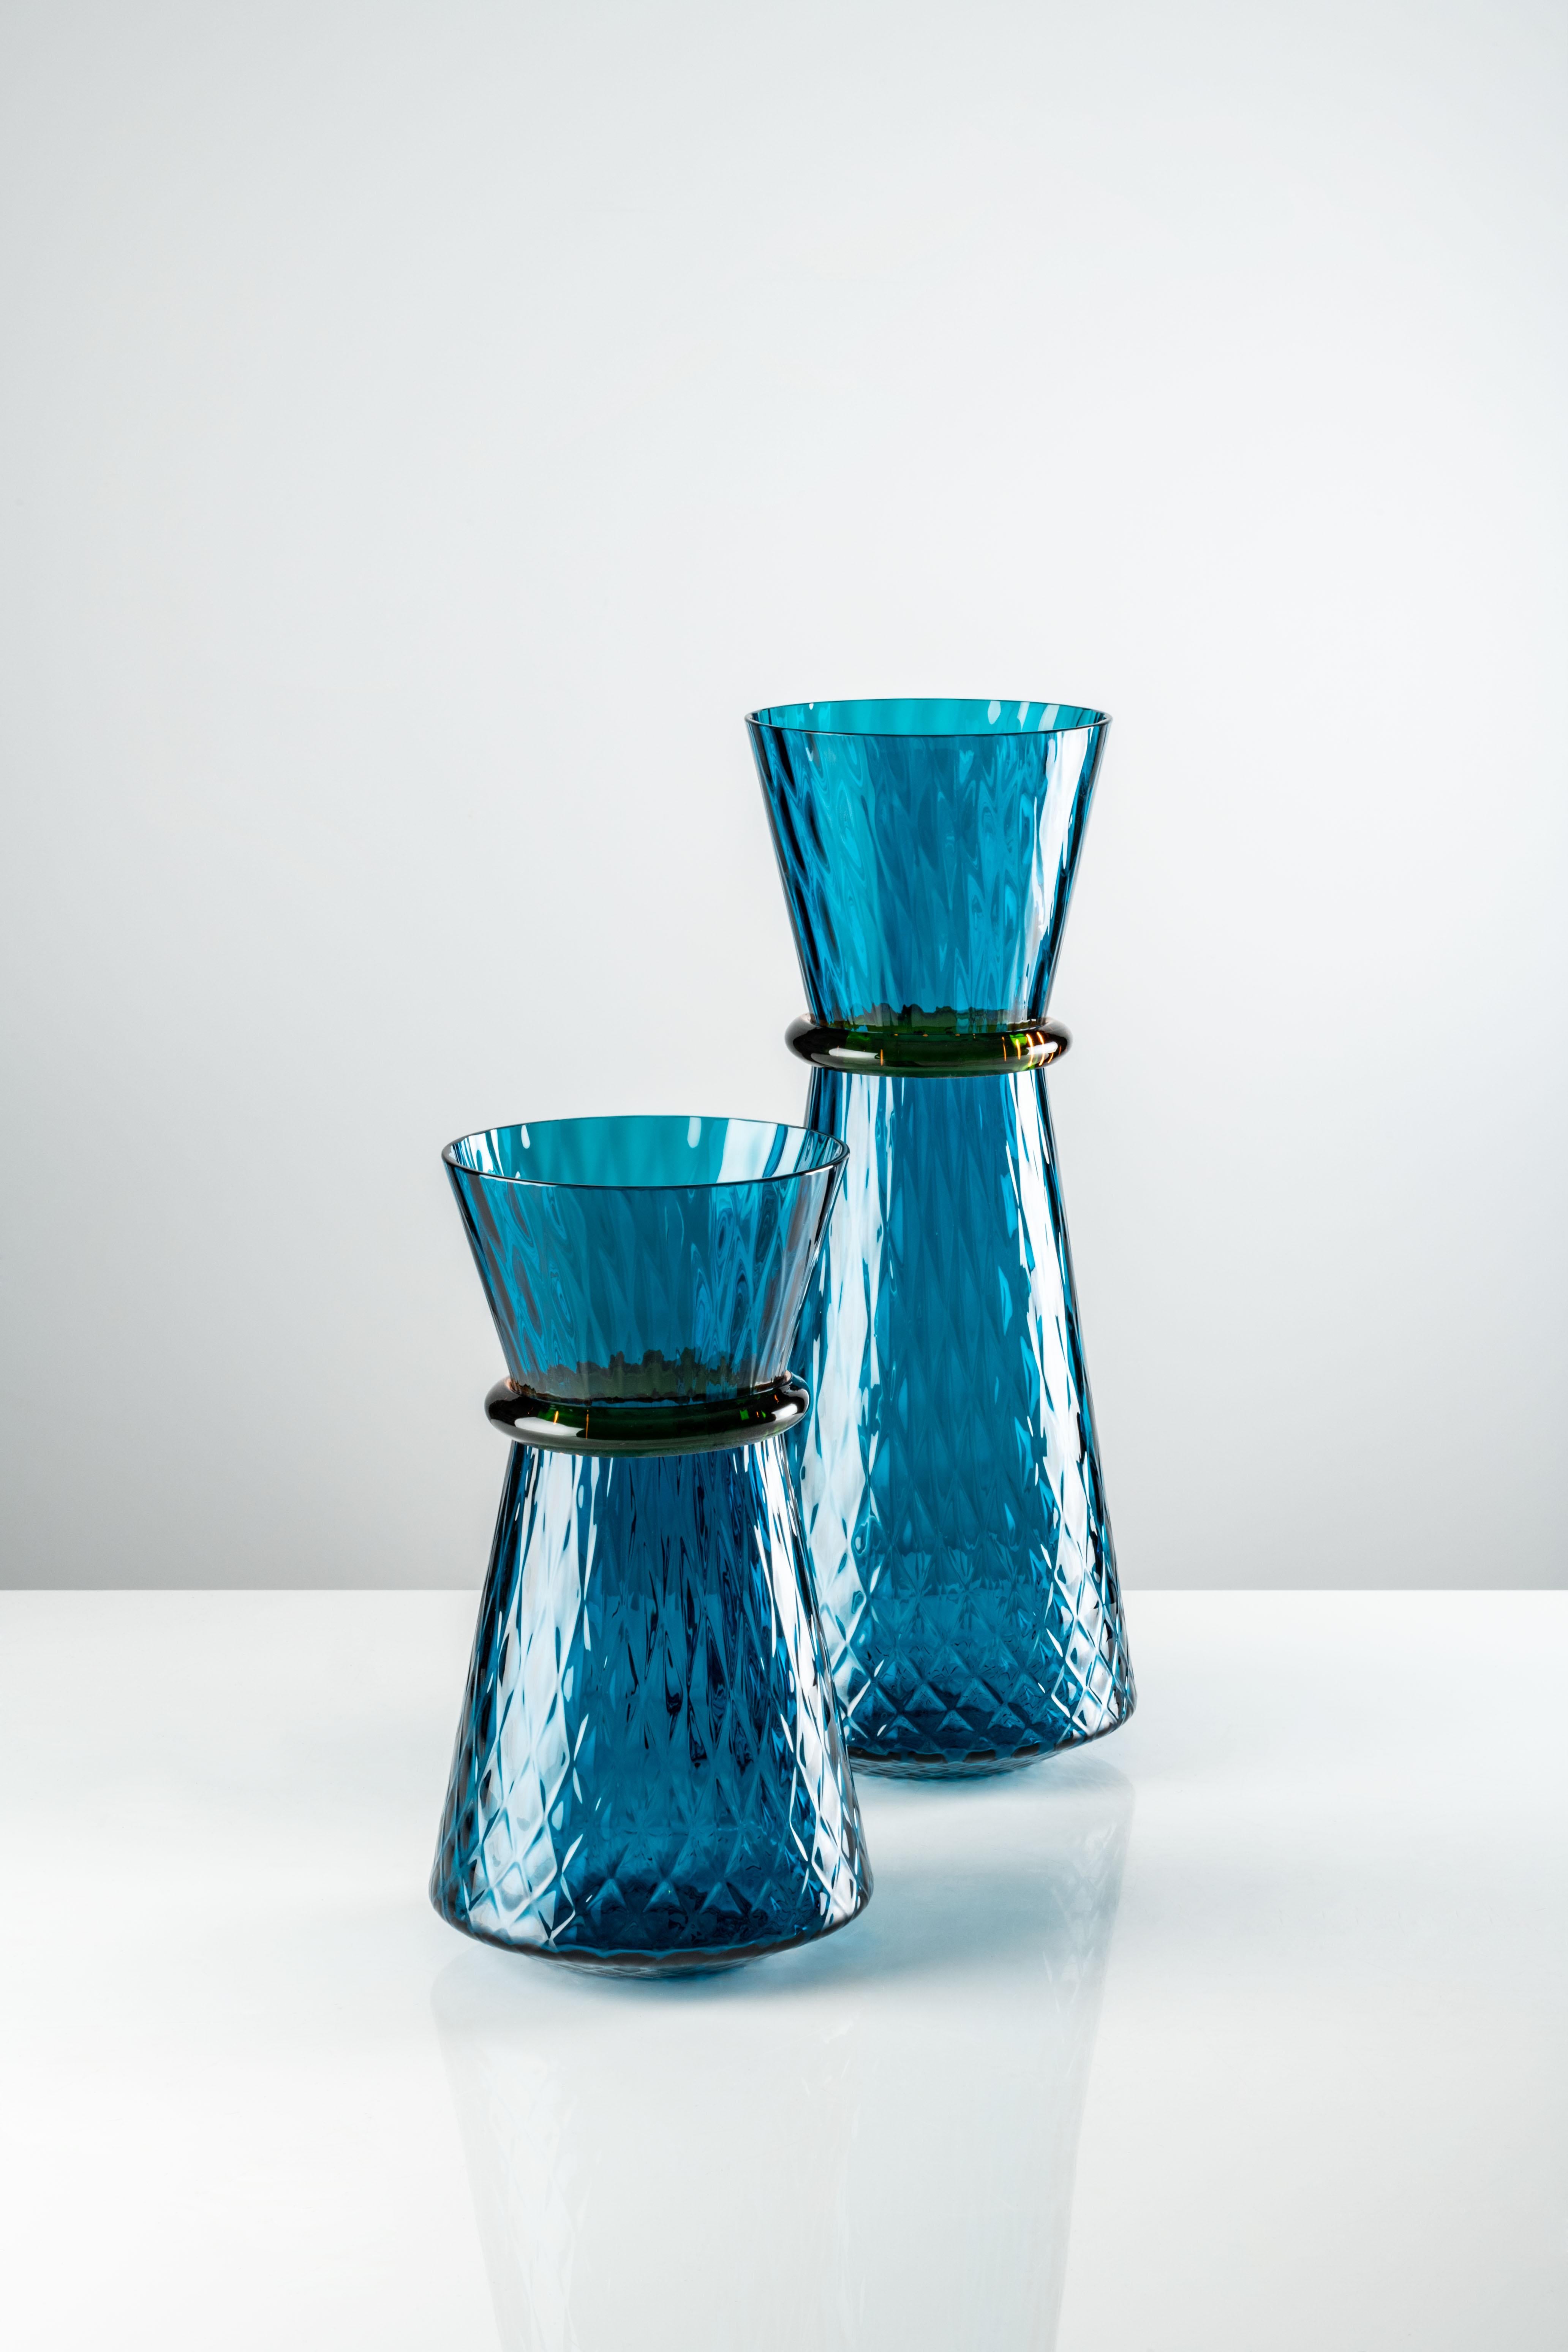 Tiara large vase in horizon and amber Murano glass by Francesco Lucchese for Venini. The art of glassmaking meets the endless potential of light. A jewel-like creation that carries an infinite sparkle, precious like gemstones. Francesco Lucchese